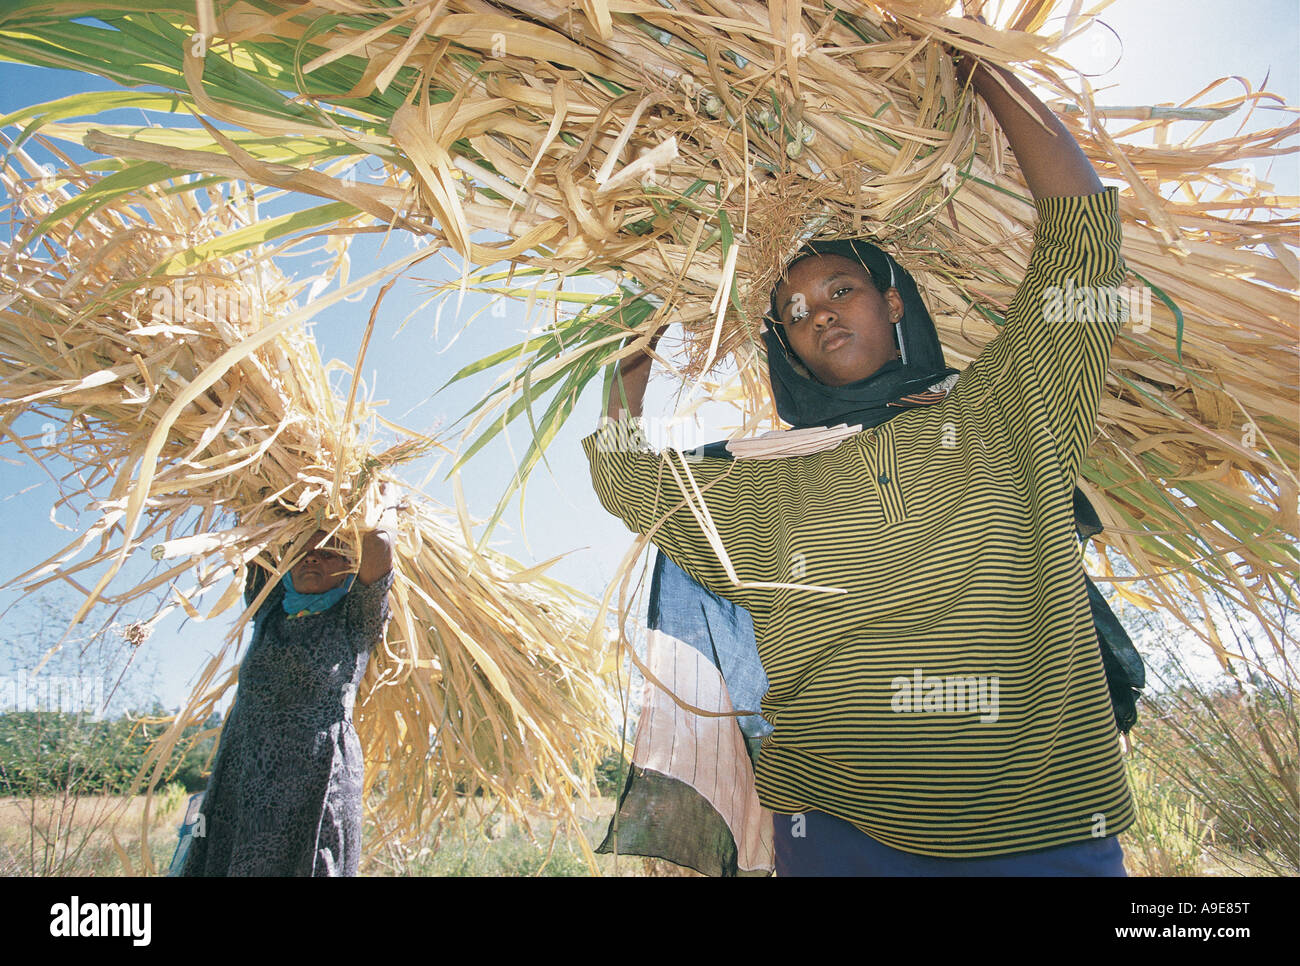 Woman carrying elephant grass for animal fodder on her head Alemaya Ethiopia Stock Photo